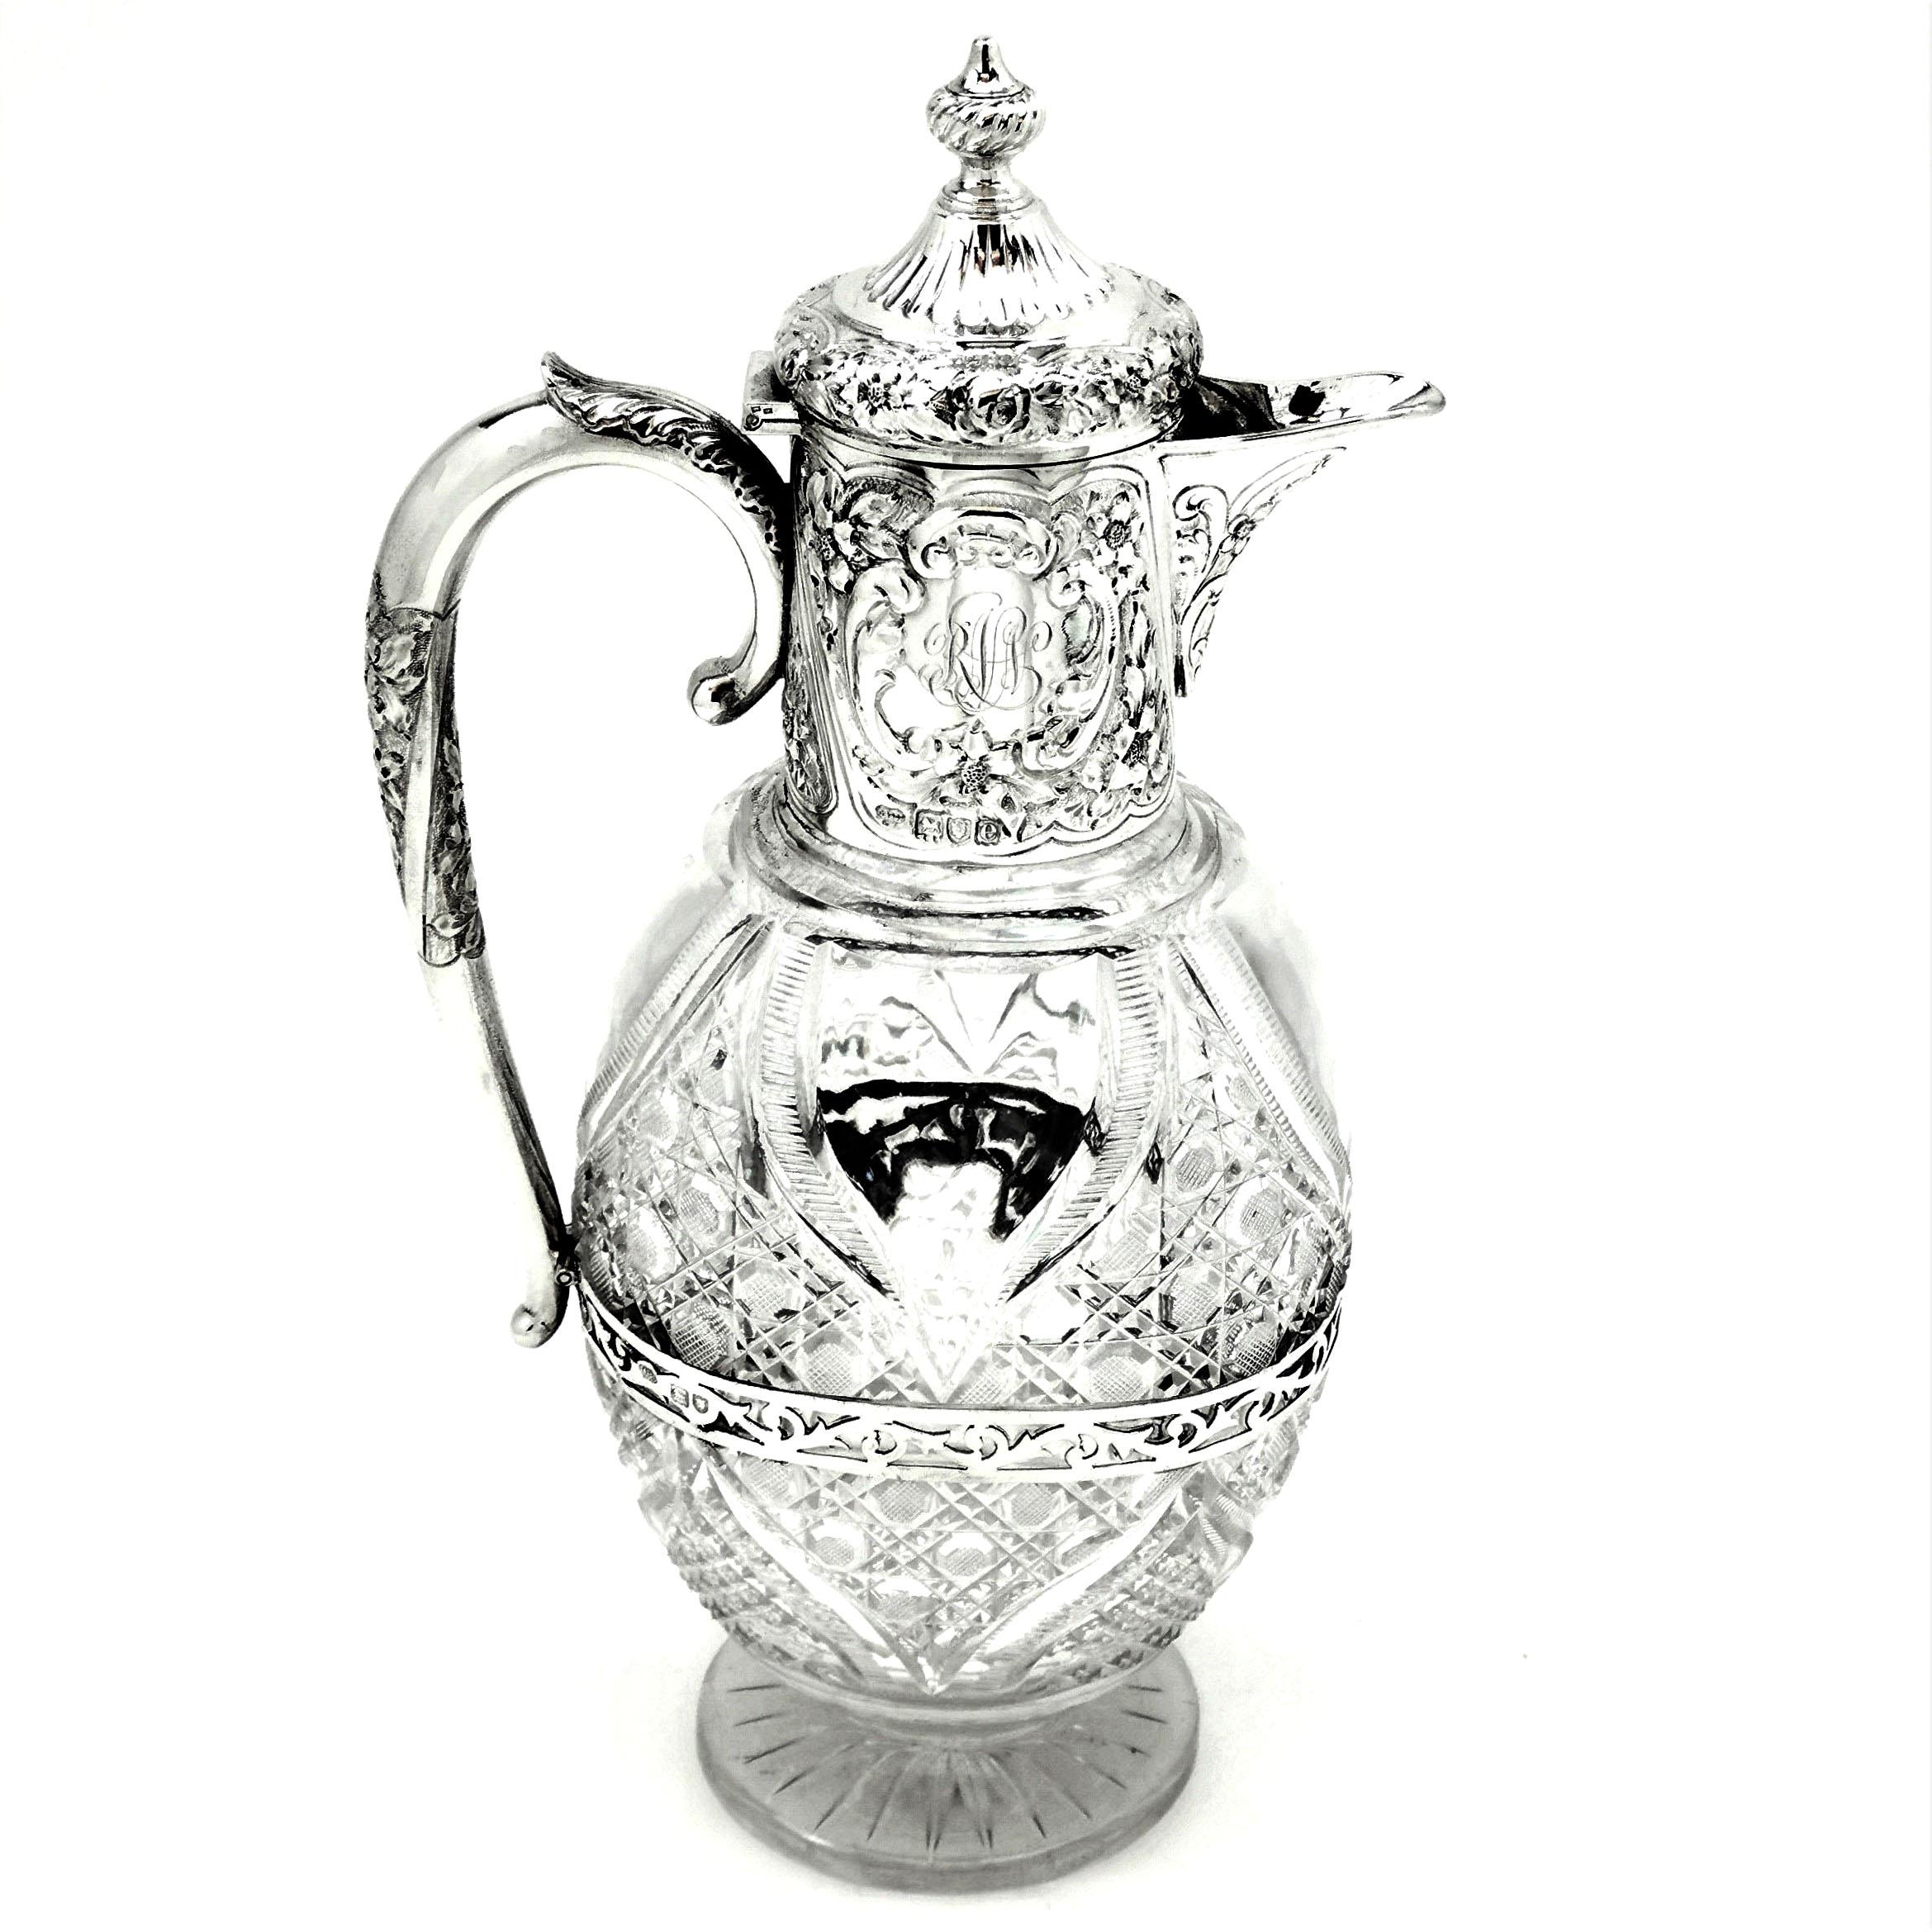 An elegant antique Victorian silver mounted cut glass Claret Jug. This Wine Jug has a cut glass body and a solid silver neck, handle and hinged Lid. The collar of the Jug has a delicate floral pattern chased around the exterior mirrored on the